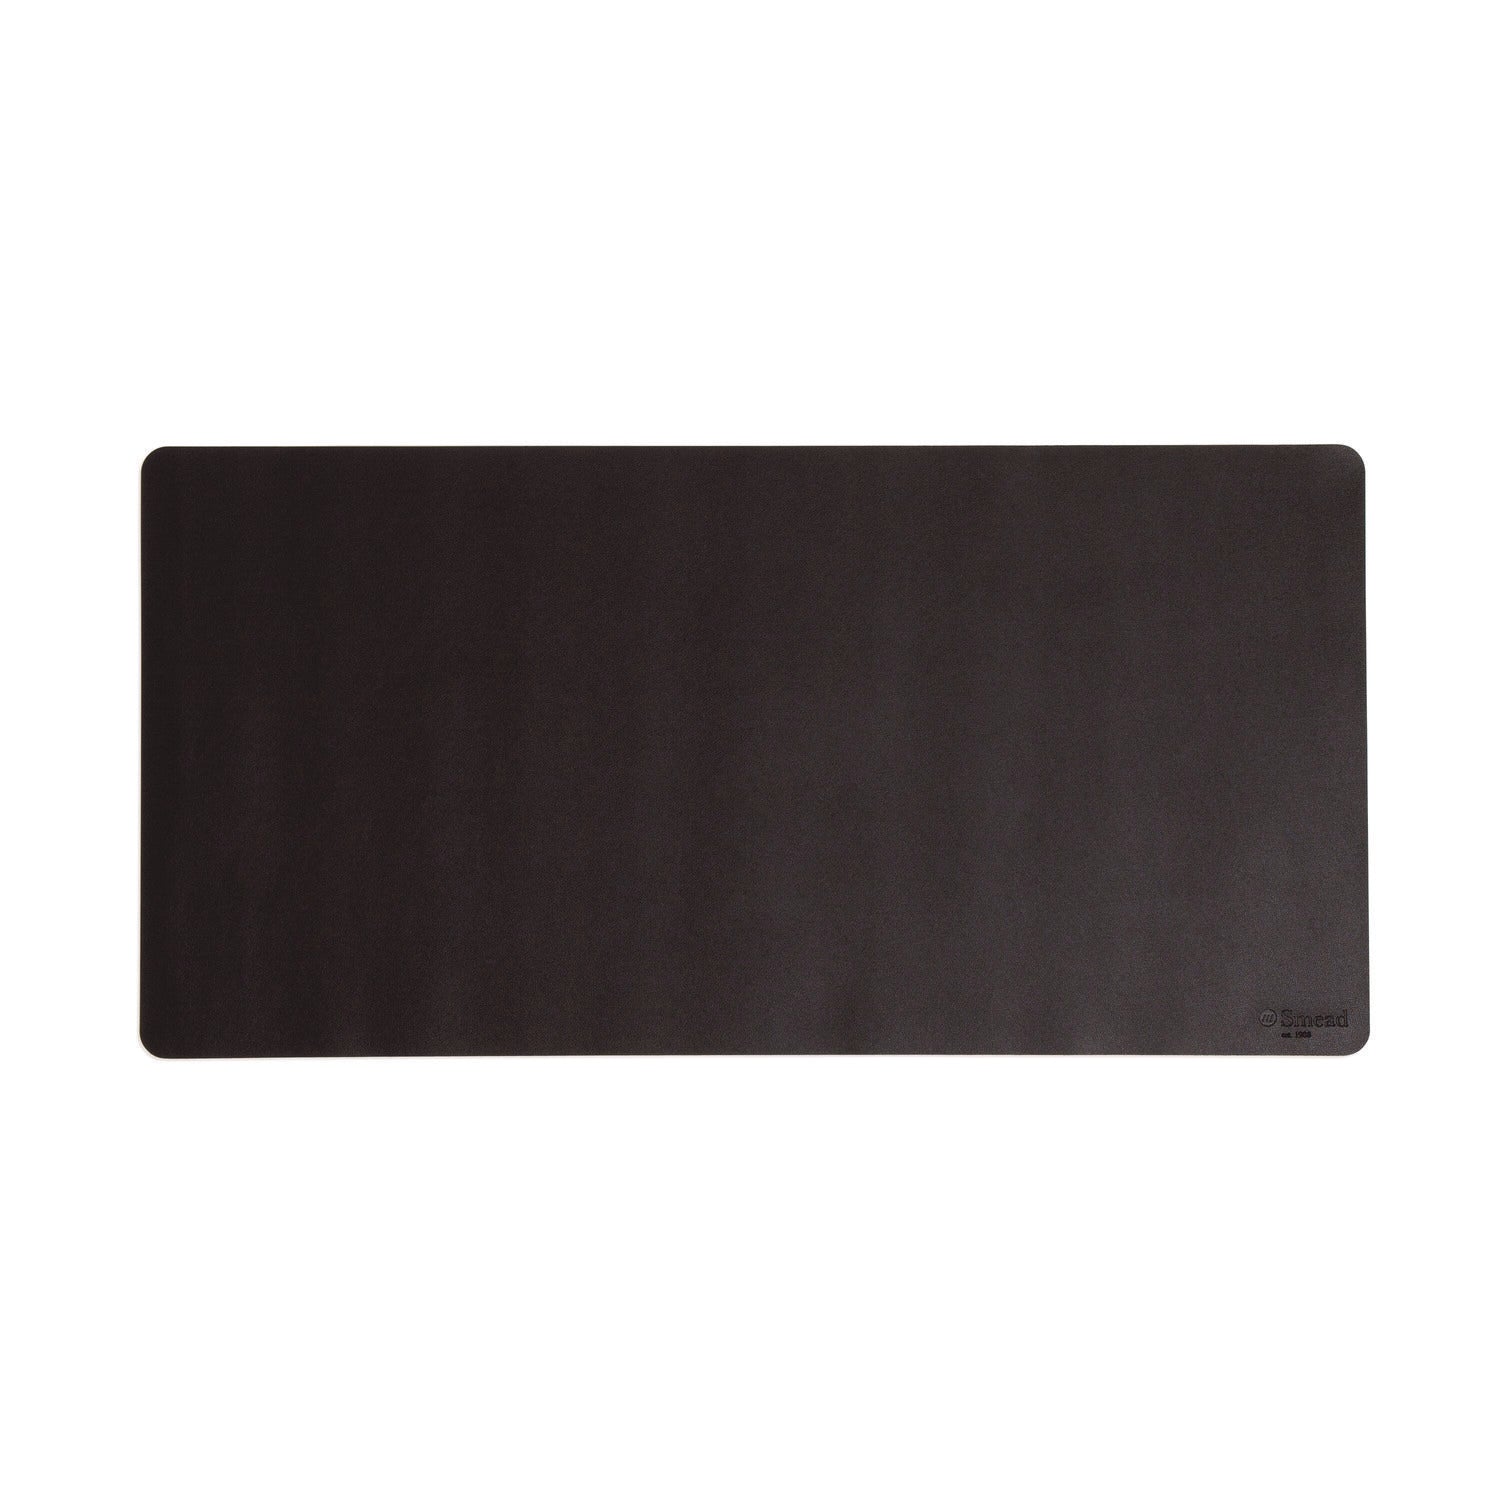 vegan-leather-desk-pads-315-x-157-charcoal_smd64833 - 1